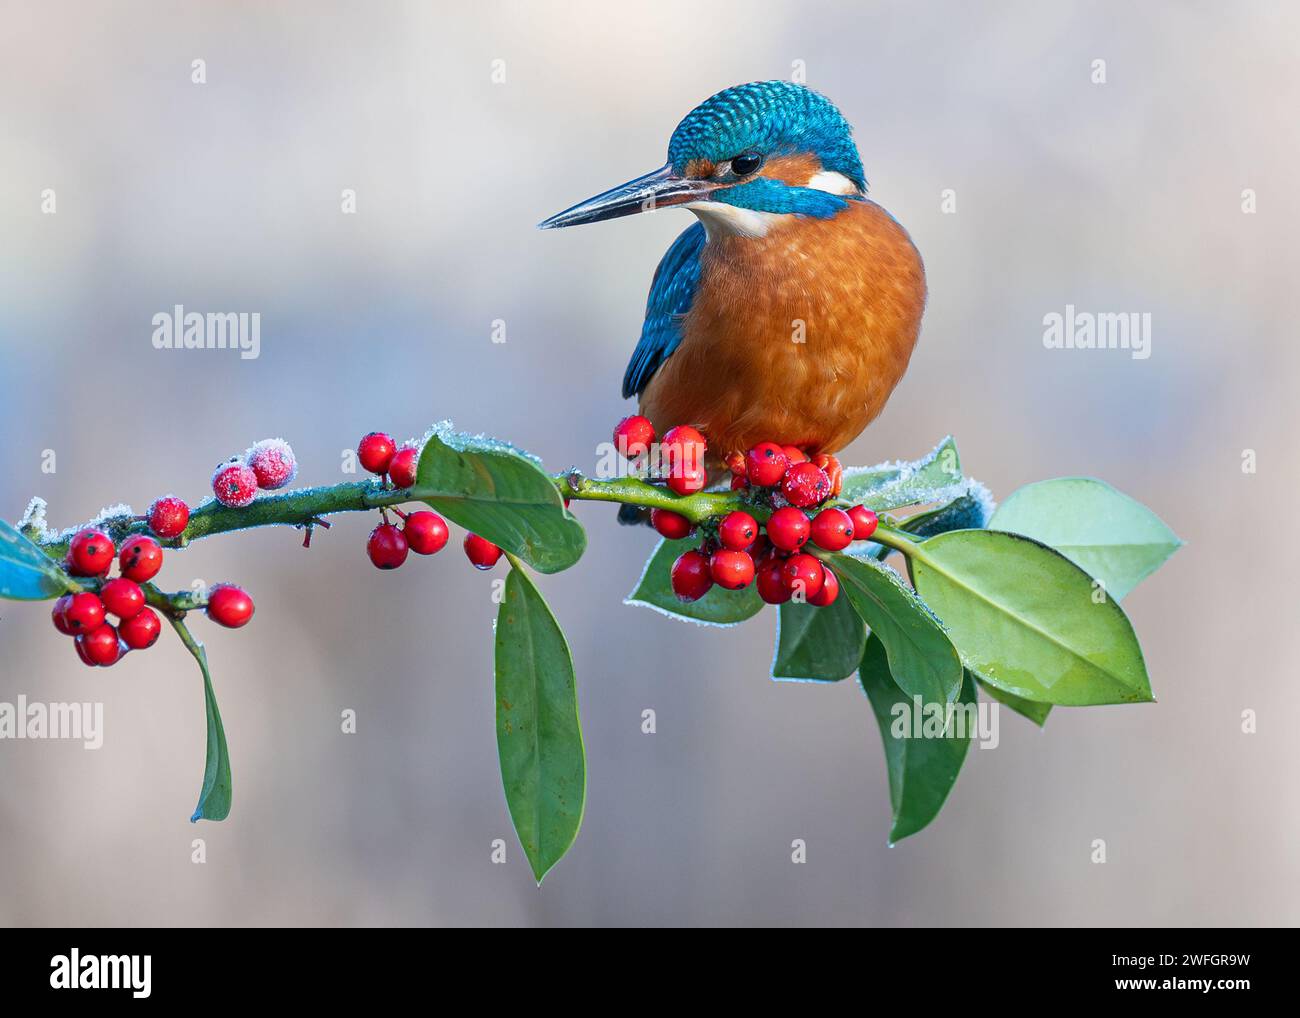 Vibrant bird   UK VIBRANT IMAGES of a Kingfisher striking a ballet pose on a Firethorn tree branch were captured on January 20 in Scotland.      The c Stock Photo